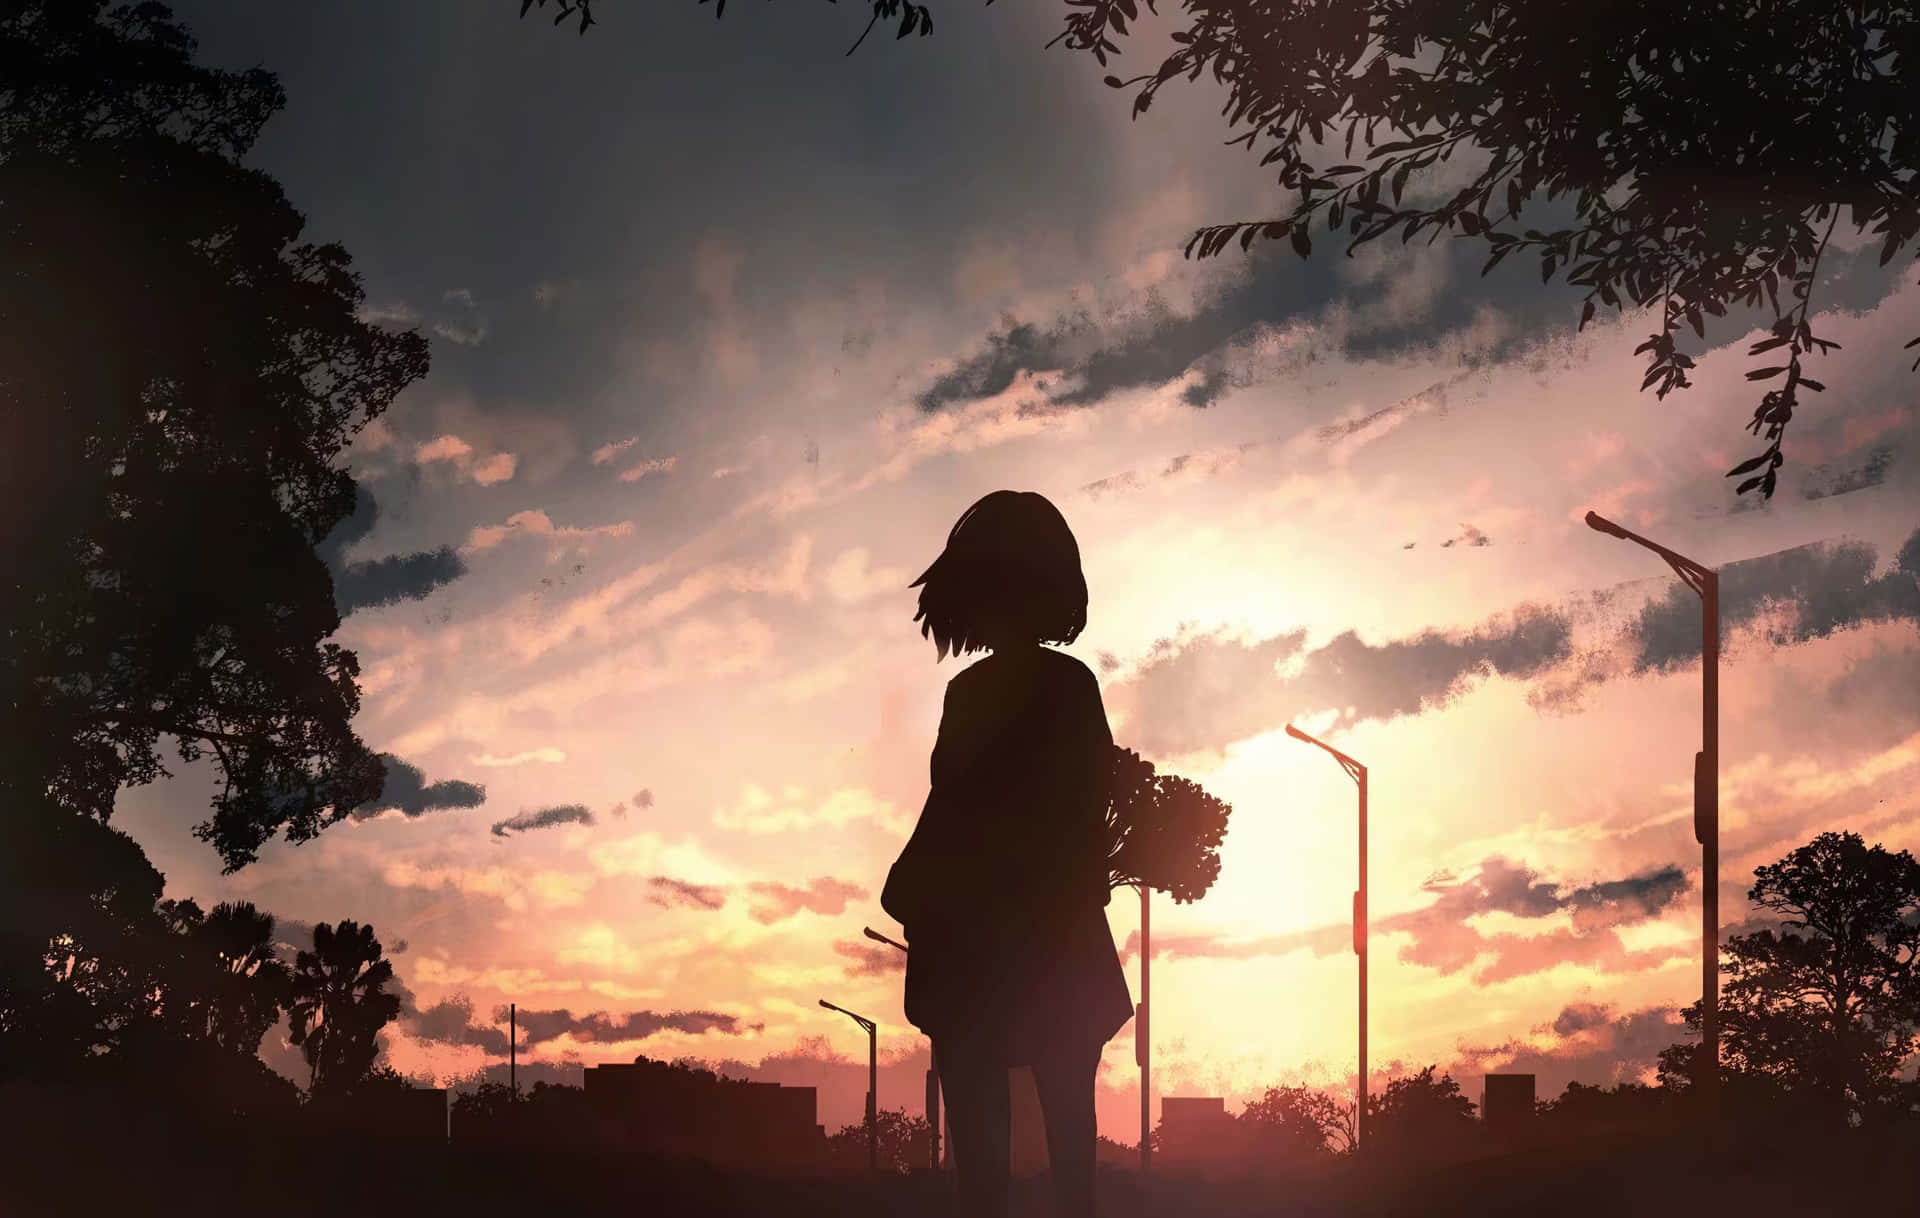 A breathtaking Anime Sunset unfolds a world of wonder and intrigue.